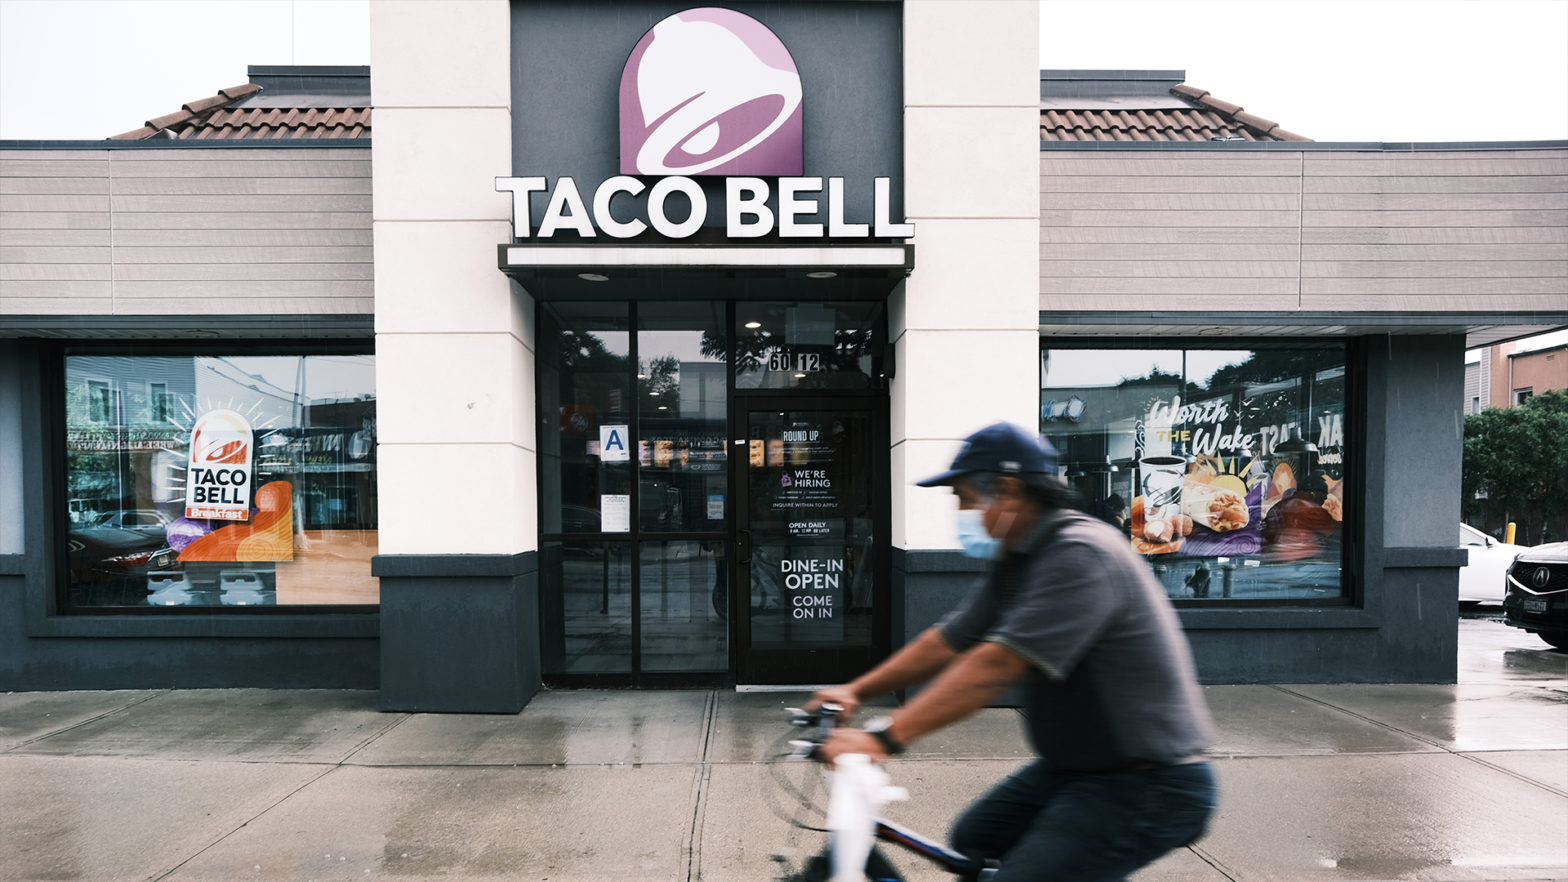 Taco Bell To Launch Business School To Help Turn Employees Into Franchise Owners